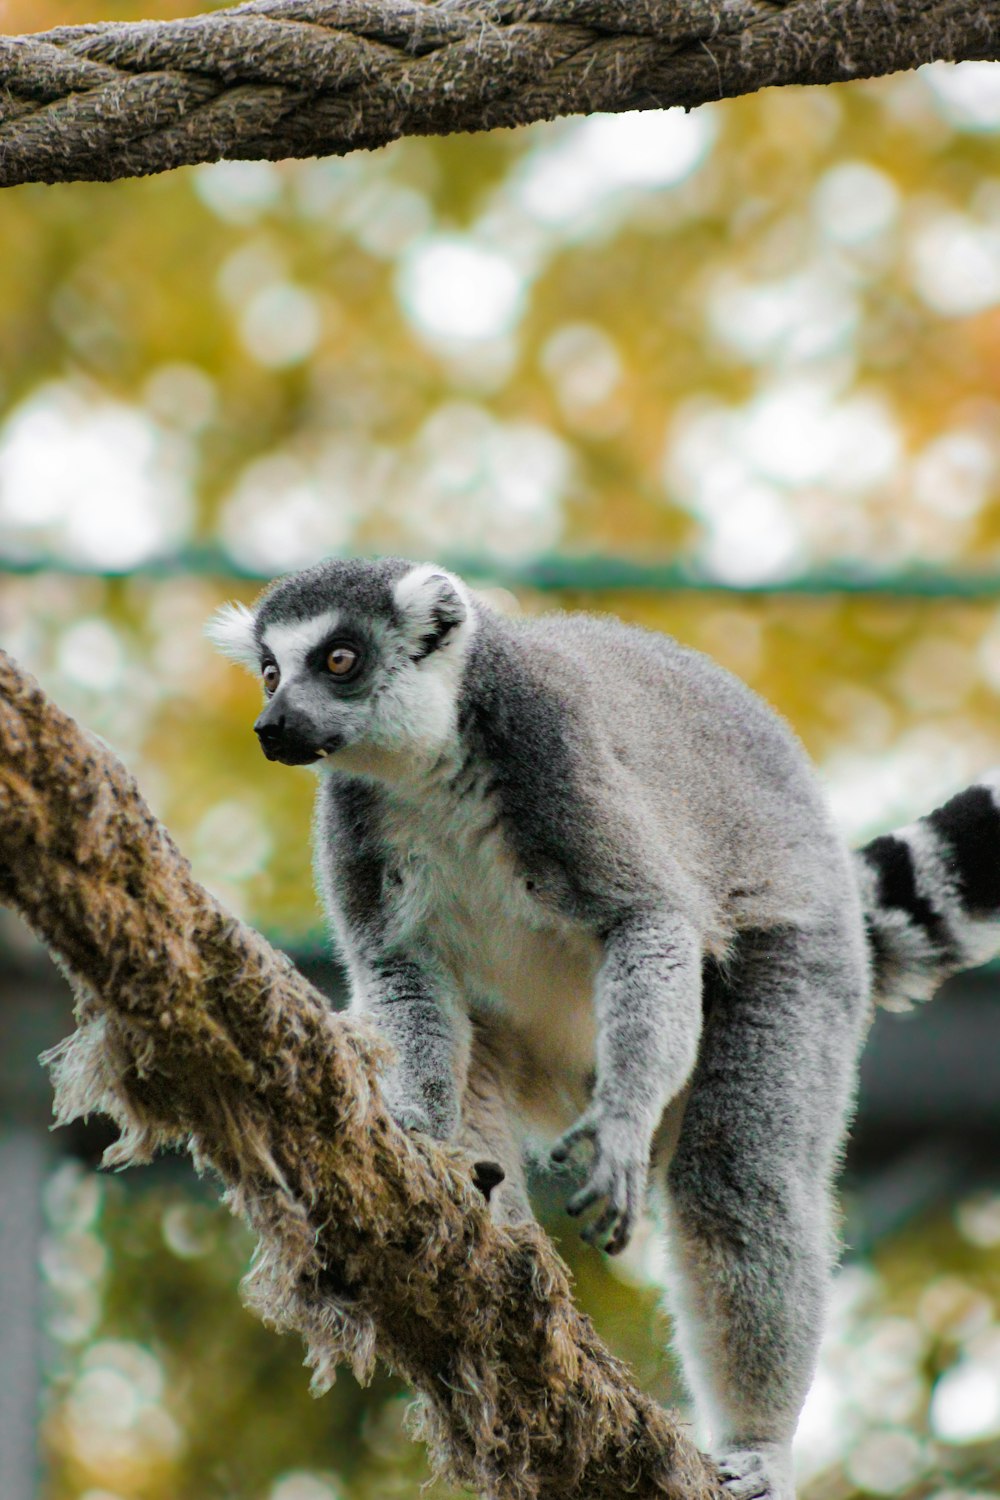 a small gray and white animal on a tree branch